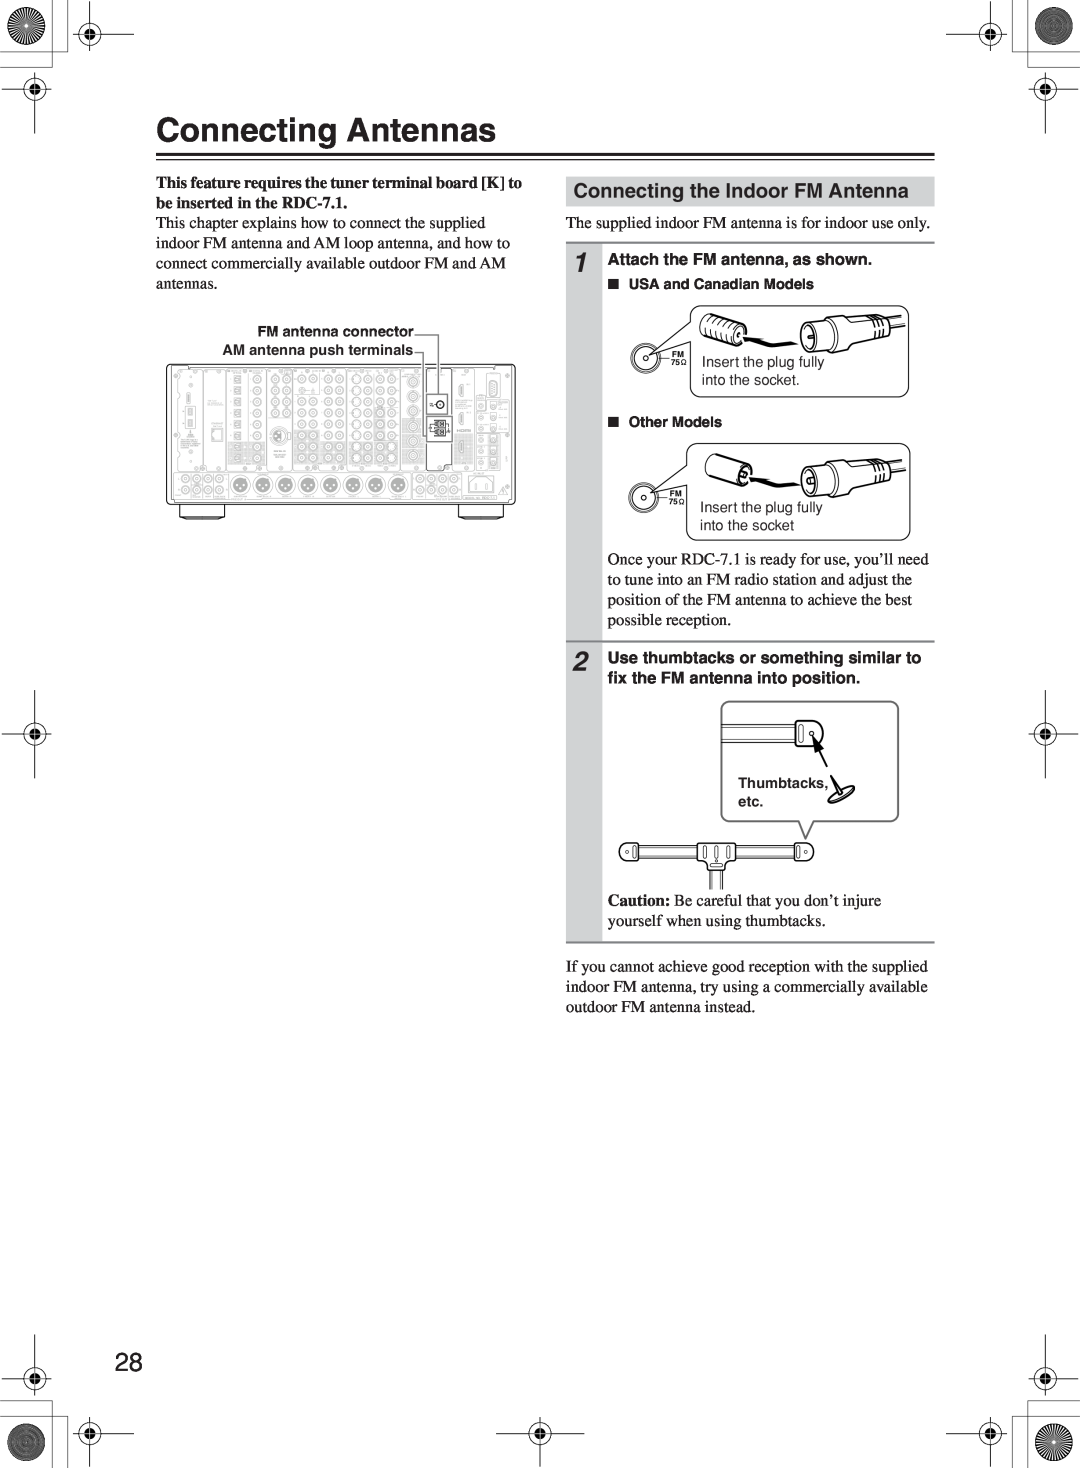 Integra RDC-7.1 instruction manual Connecting Antennas, Connecting the Indoor FM Antenna 